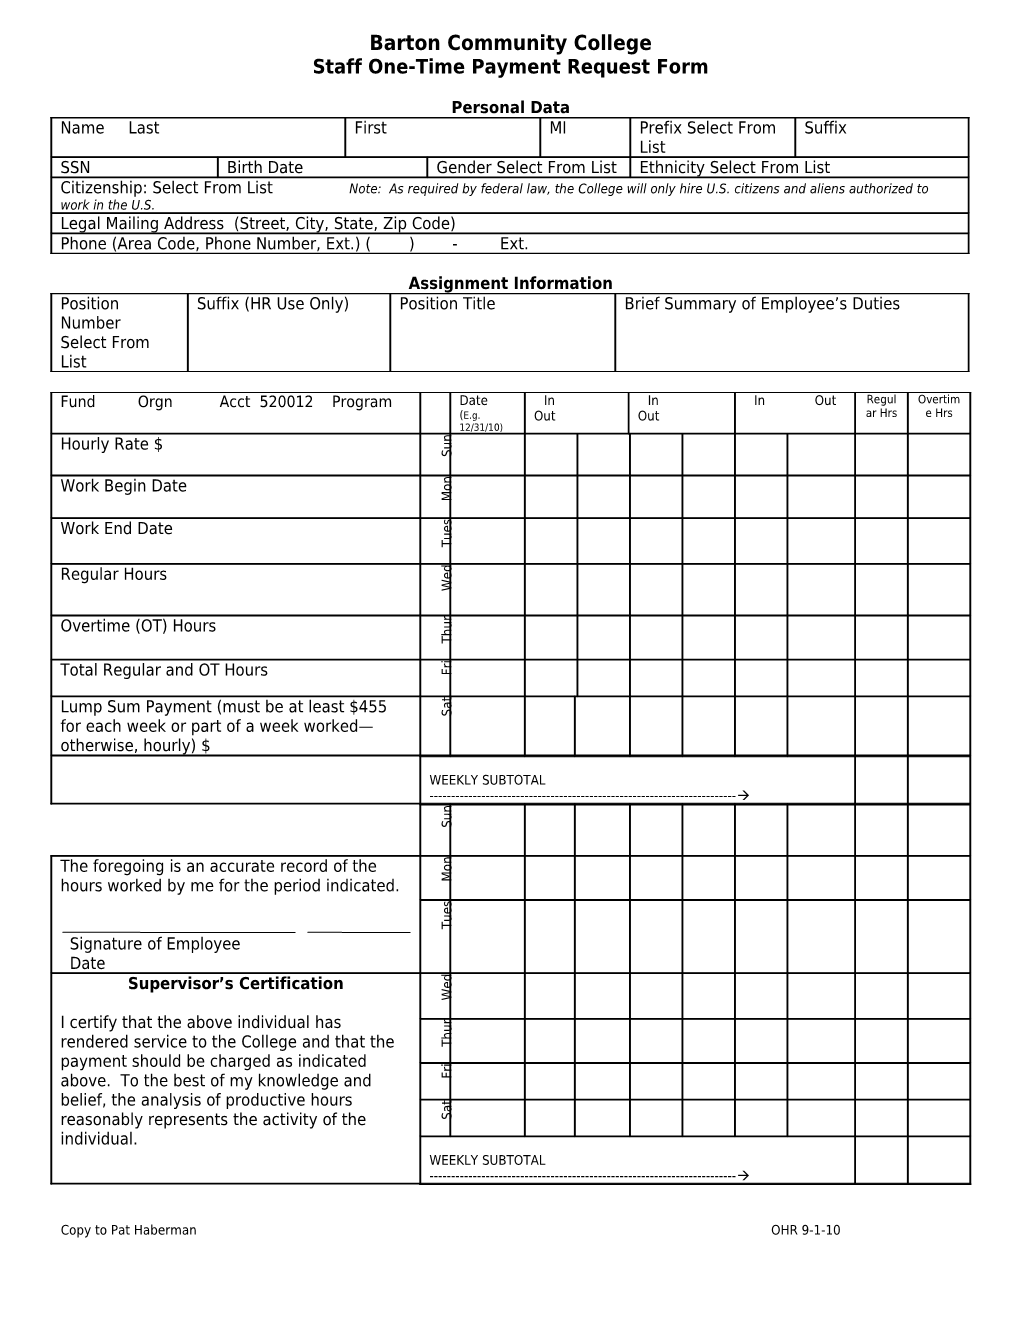 Staff One-Time Payment Request Form